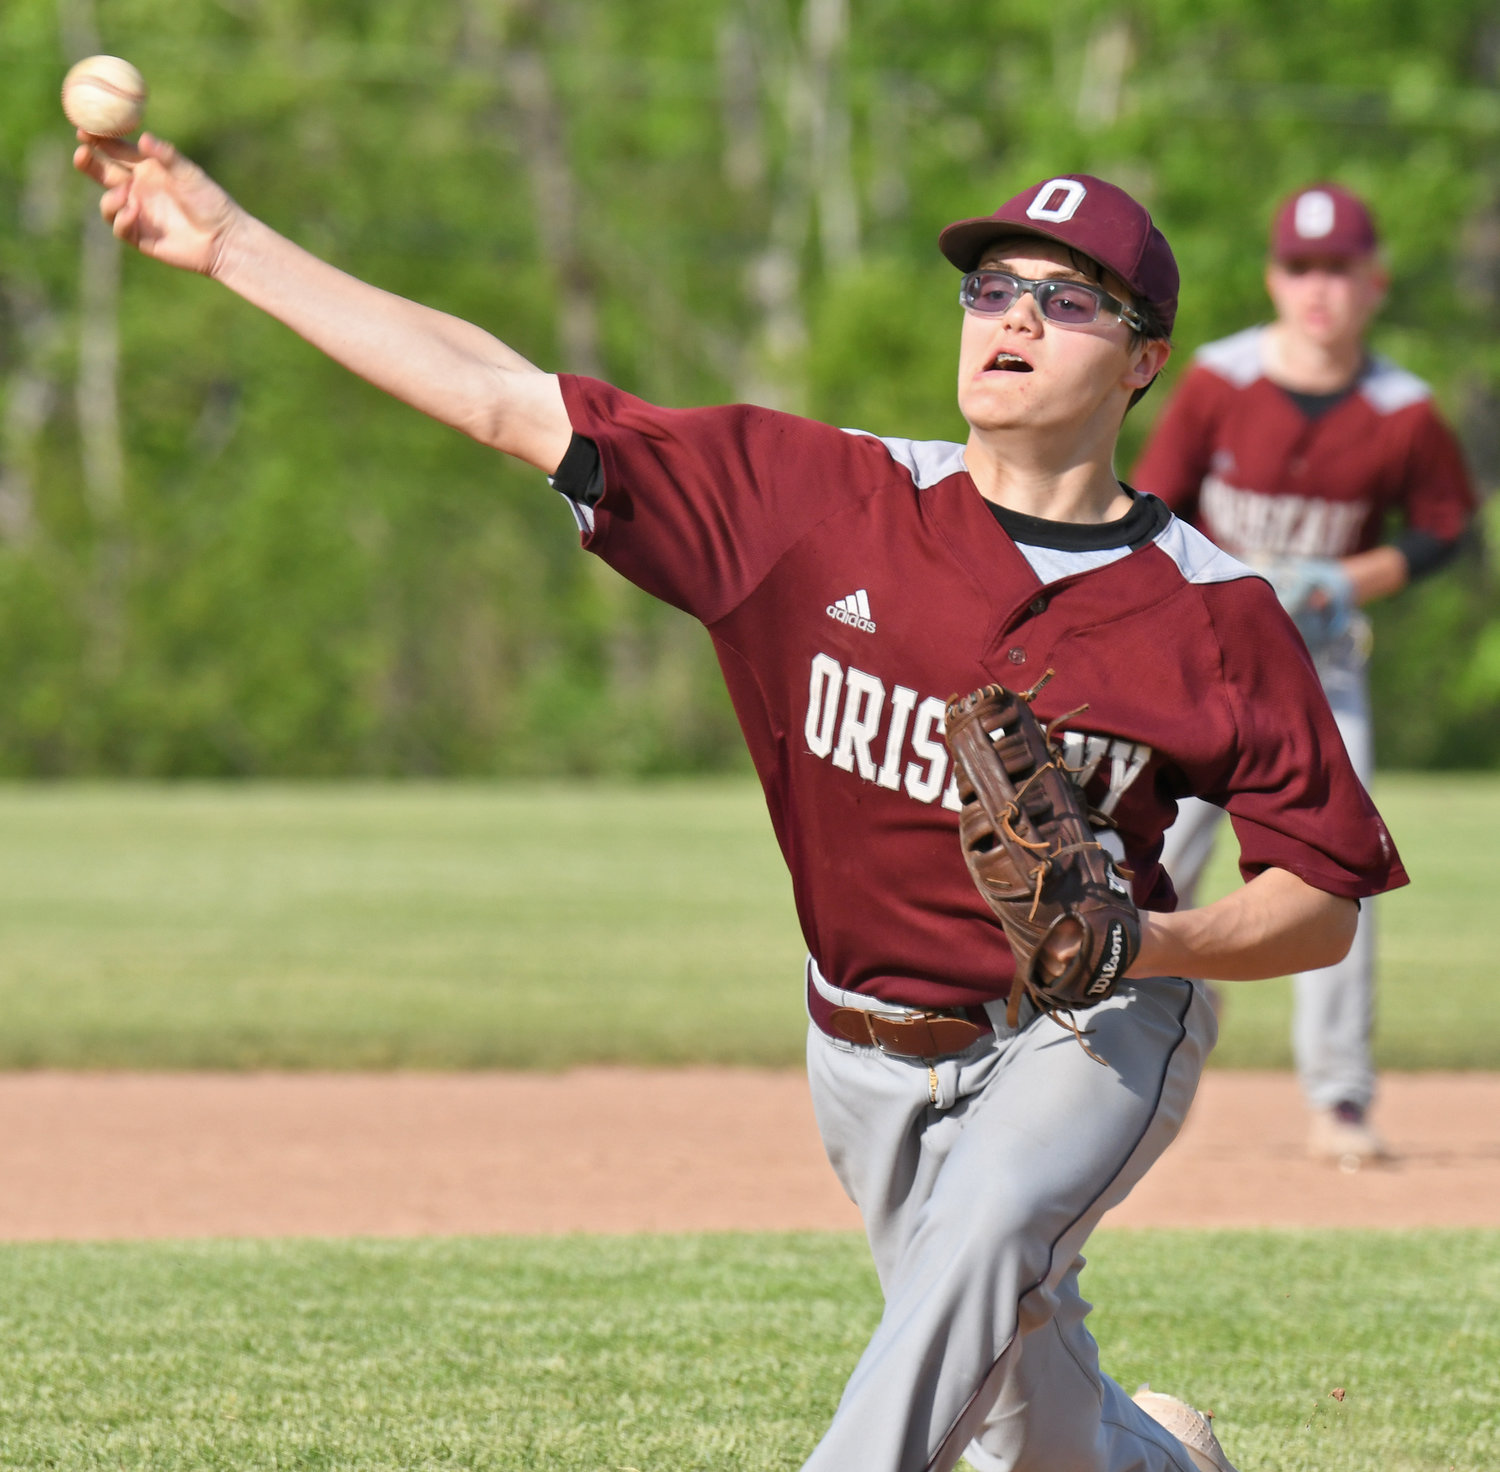 Oriskany starting pitcher Chase Koenig delivers against Mater Dei during the Section III Class D baseball quarterfinal on Thursday. Koenig struck out eight batters while allowing four hits and a run in six innings on the mound in the Redskins’ 11-3 win. High school baseball roundup on page 13.